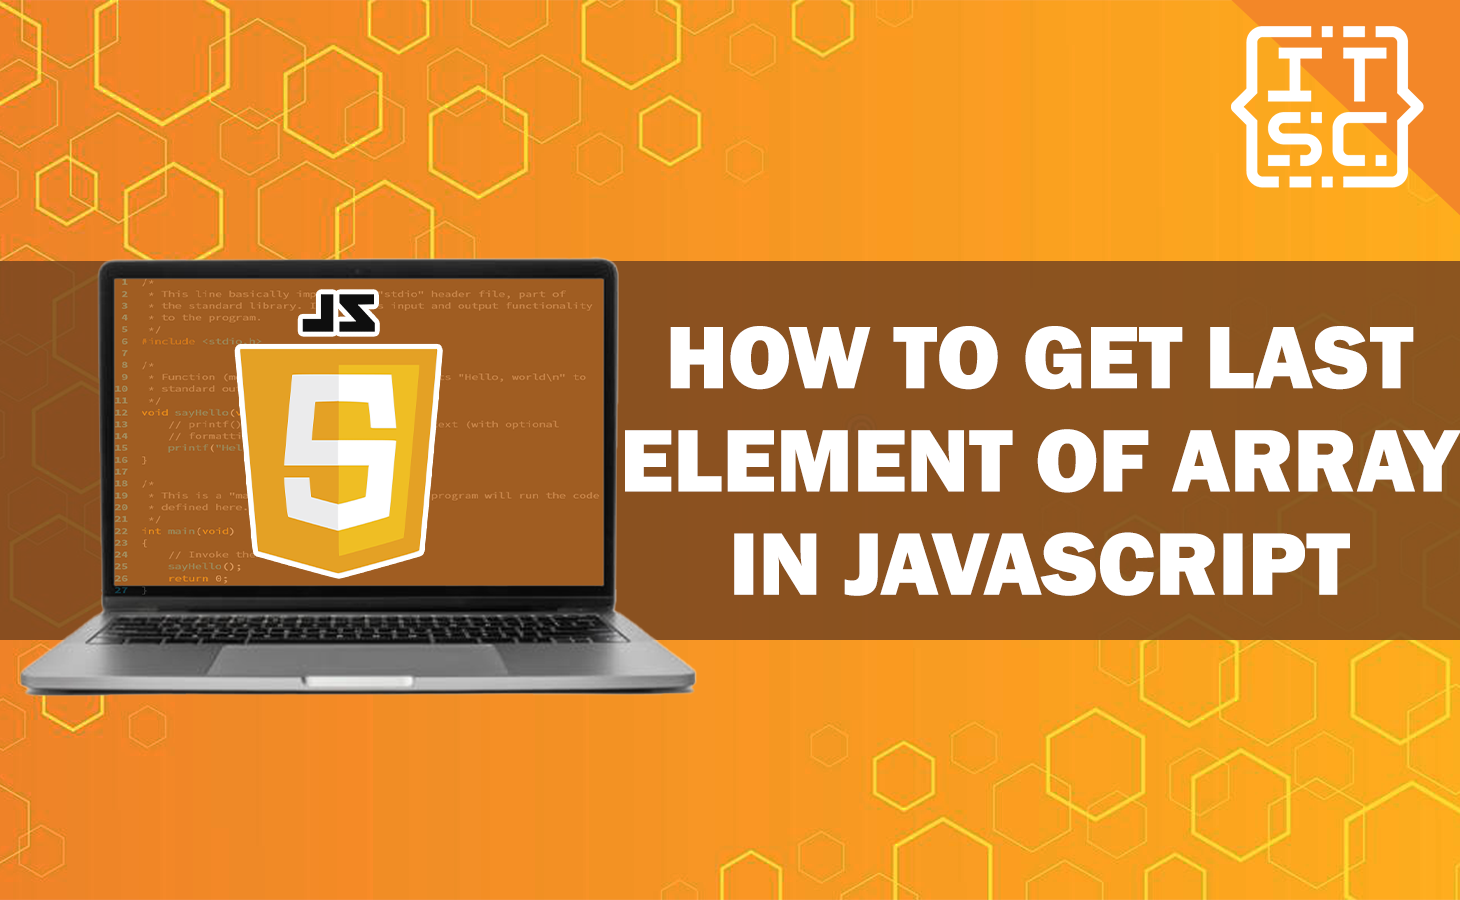 How to get last element of array in JavaScript